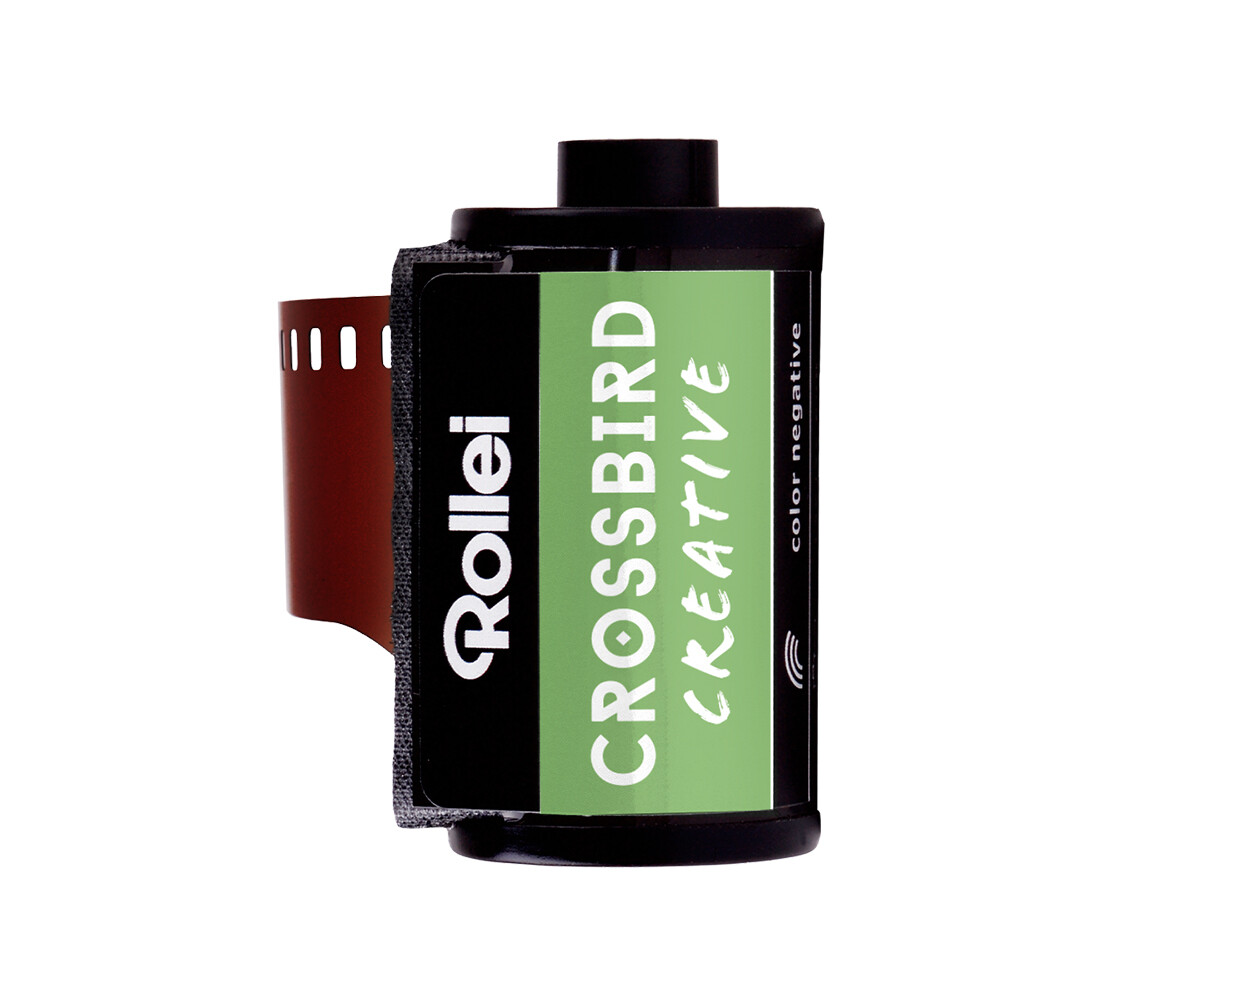 ROLLEI Crossbird 200 Color Transparency Film 135-36 date 07/2023 - pre-order now (available from approx. 02.08.2021)